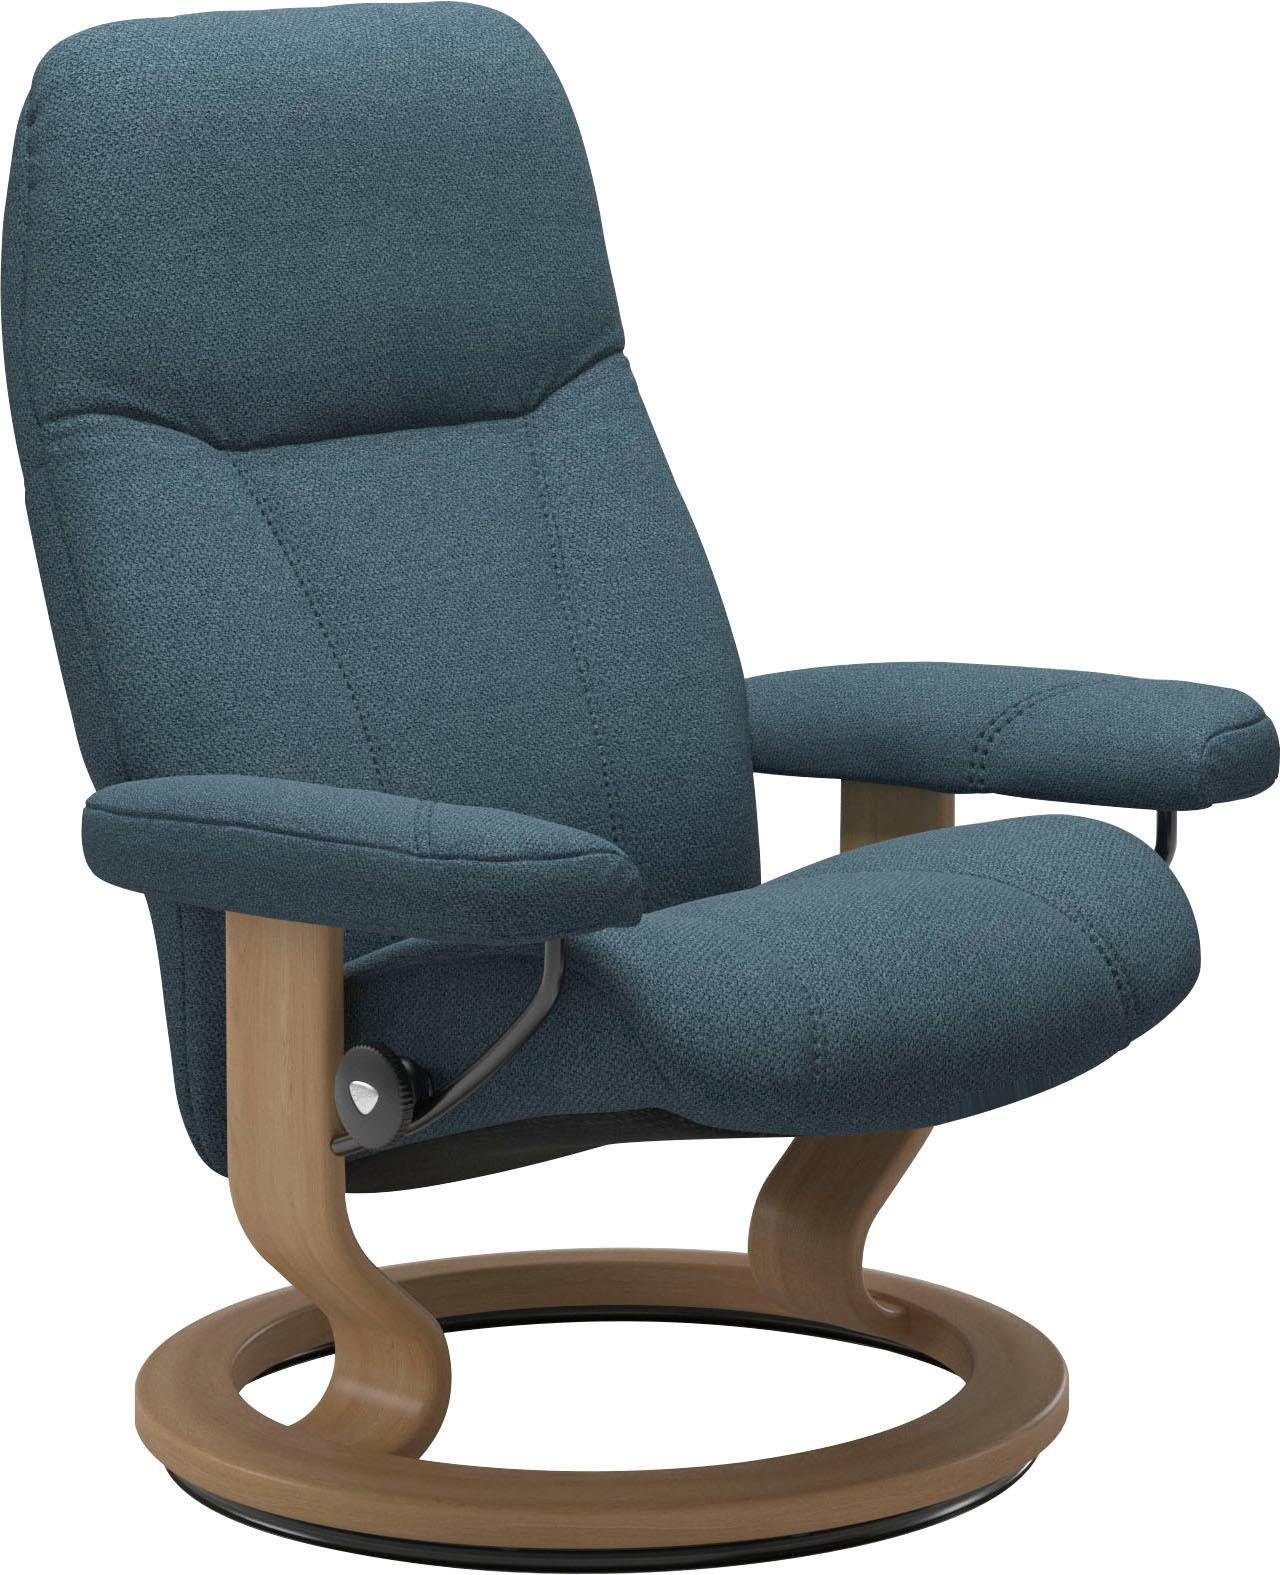 Stressless® Relaxsessel Consul, mit Classic Base, Größe S, Gestell Eiche | Funktionssessel